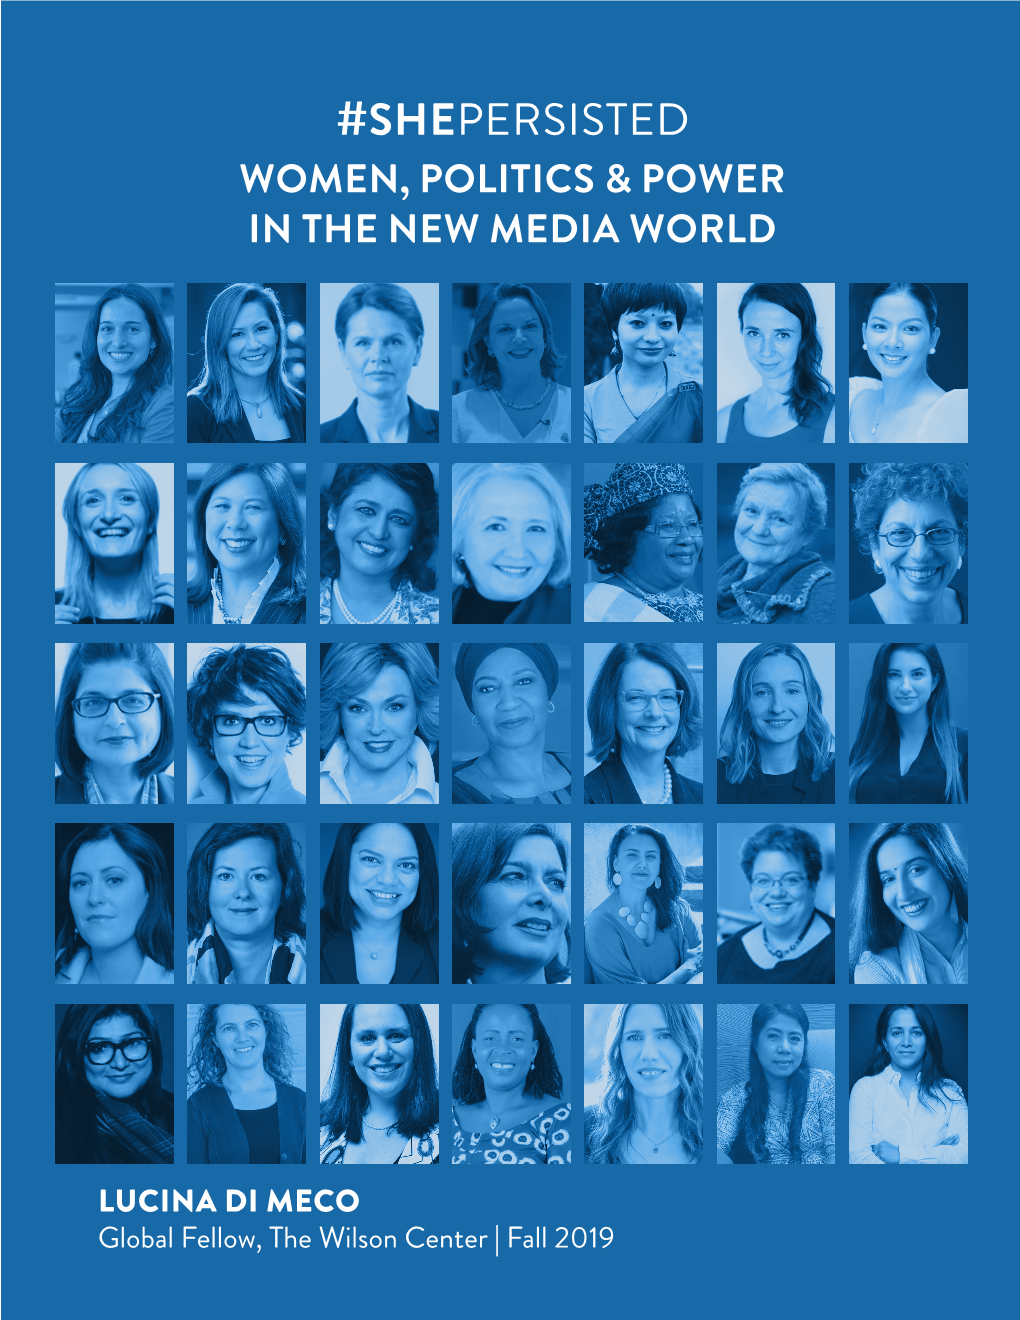 Shepersisted Women, Politics & Power in the New Media World